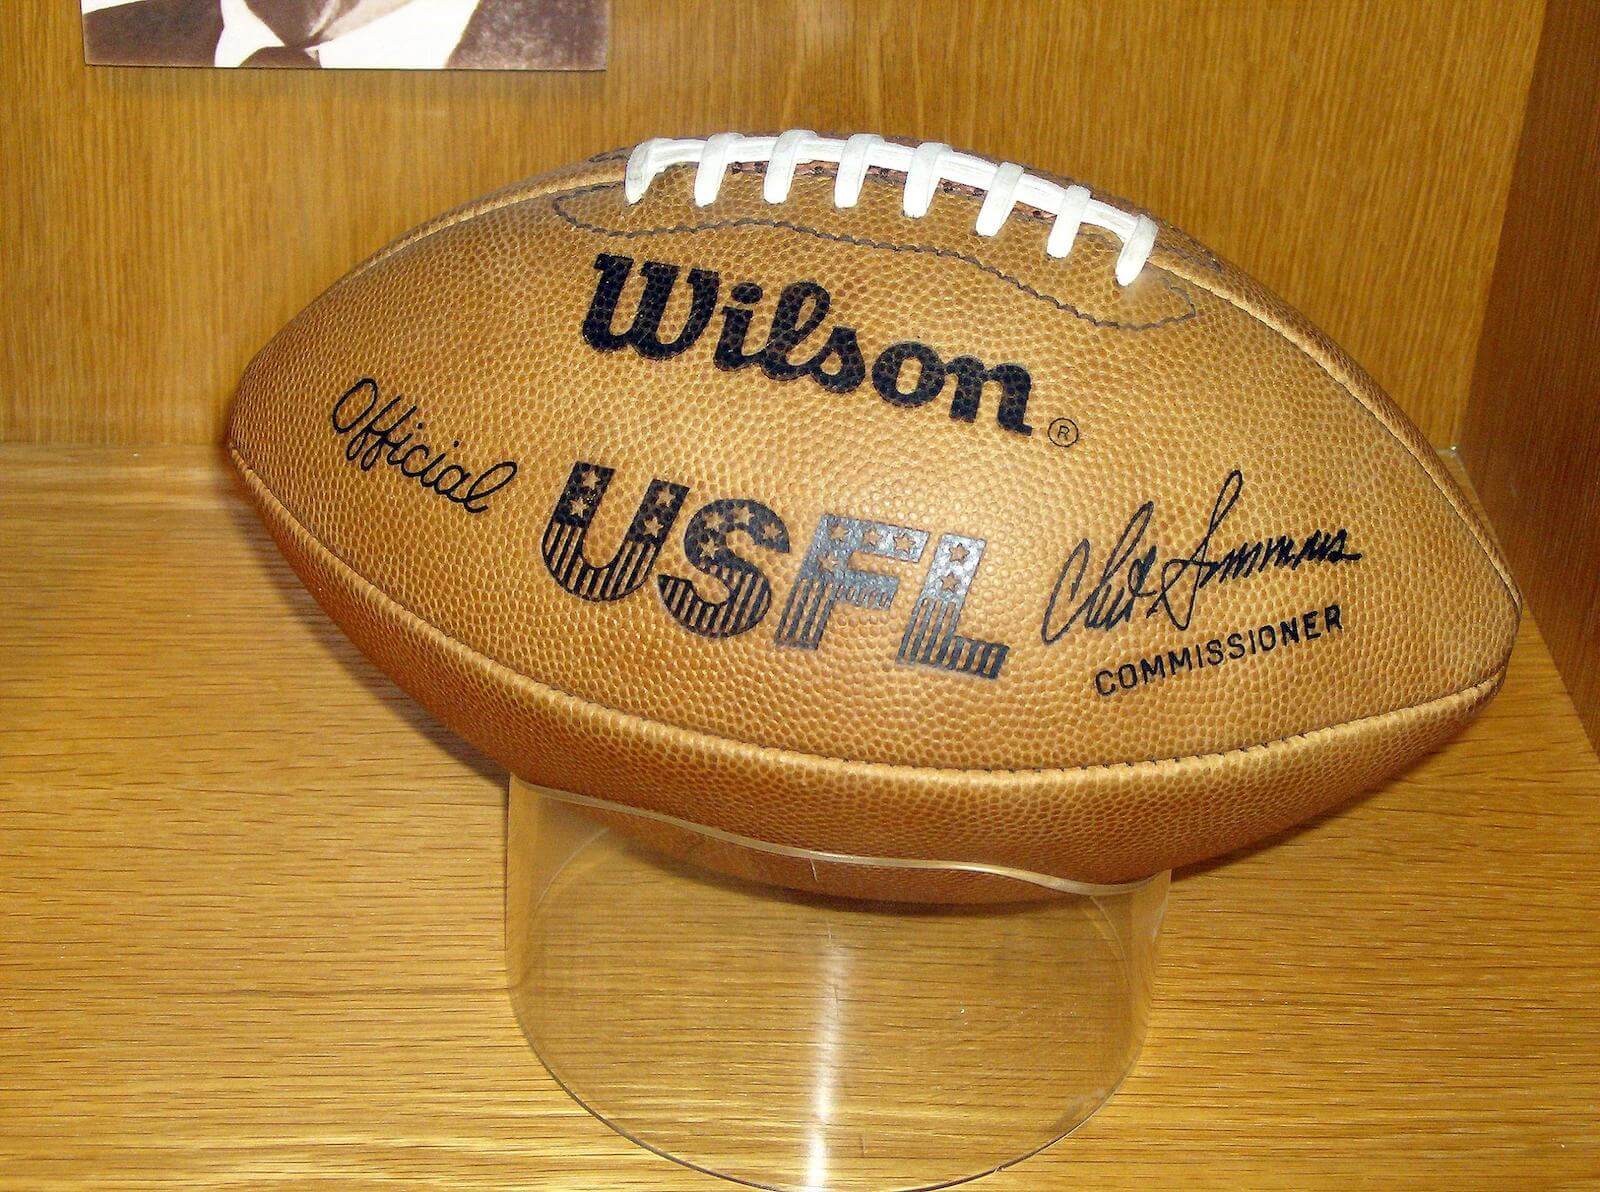 USFL vs. NFL – What’s The Difference?